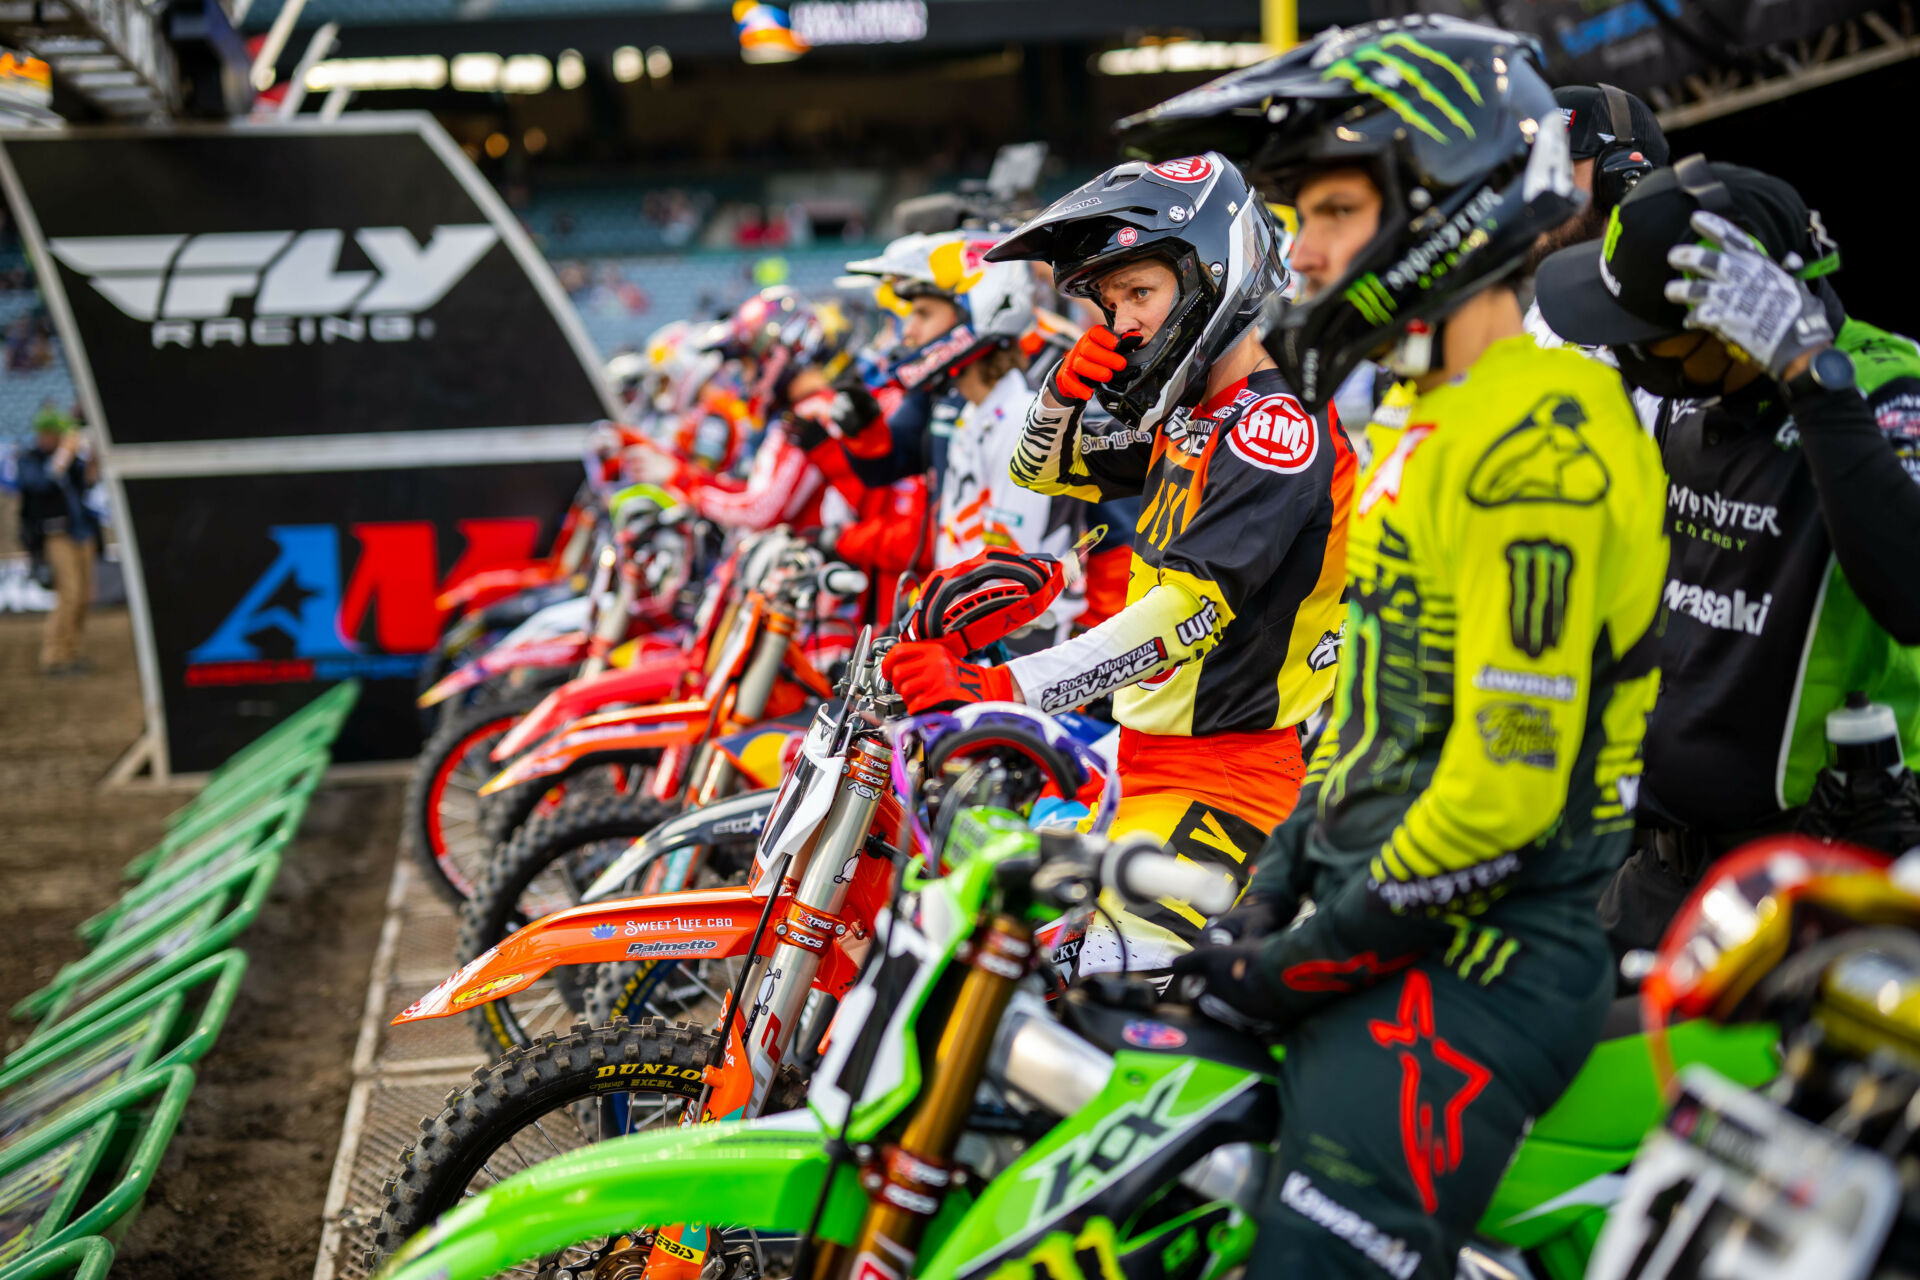 Riders at the start line at an AMA supercross event. Photo courtesy Feld Motor Sports.